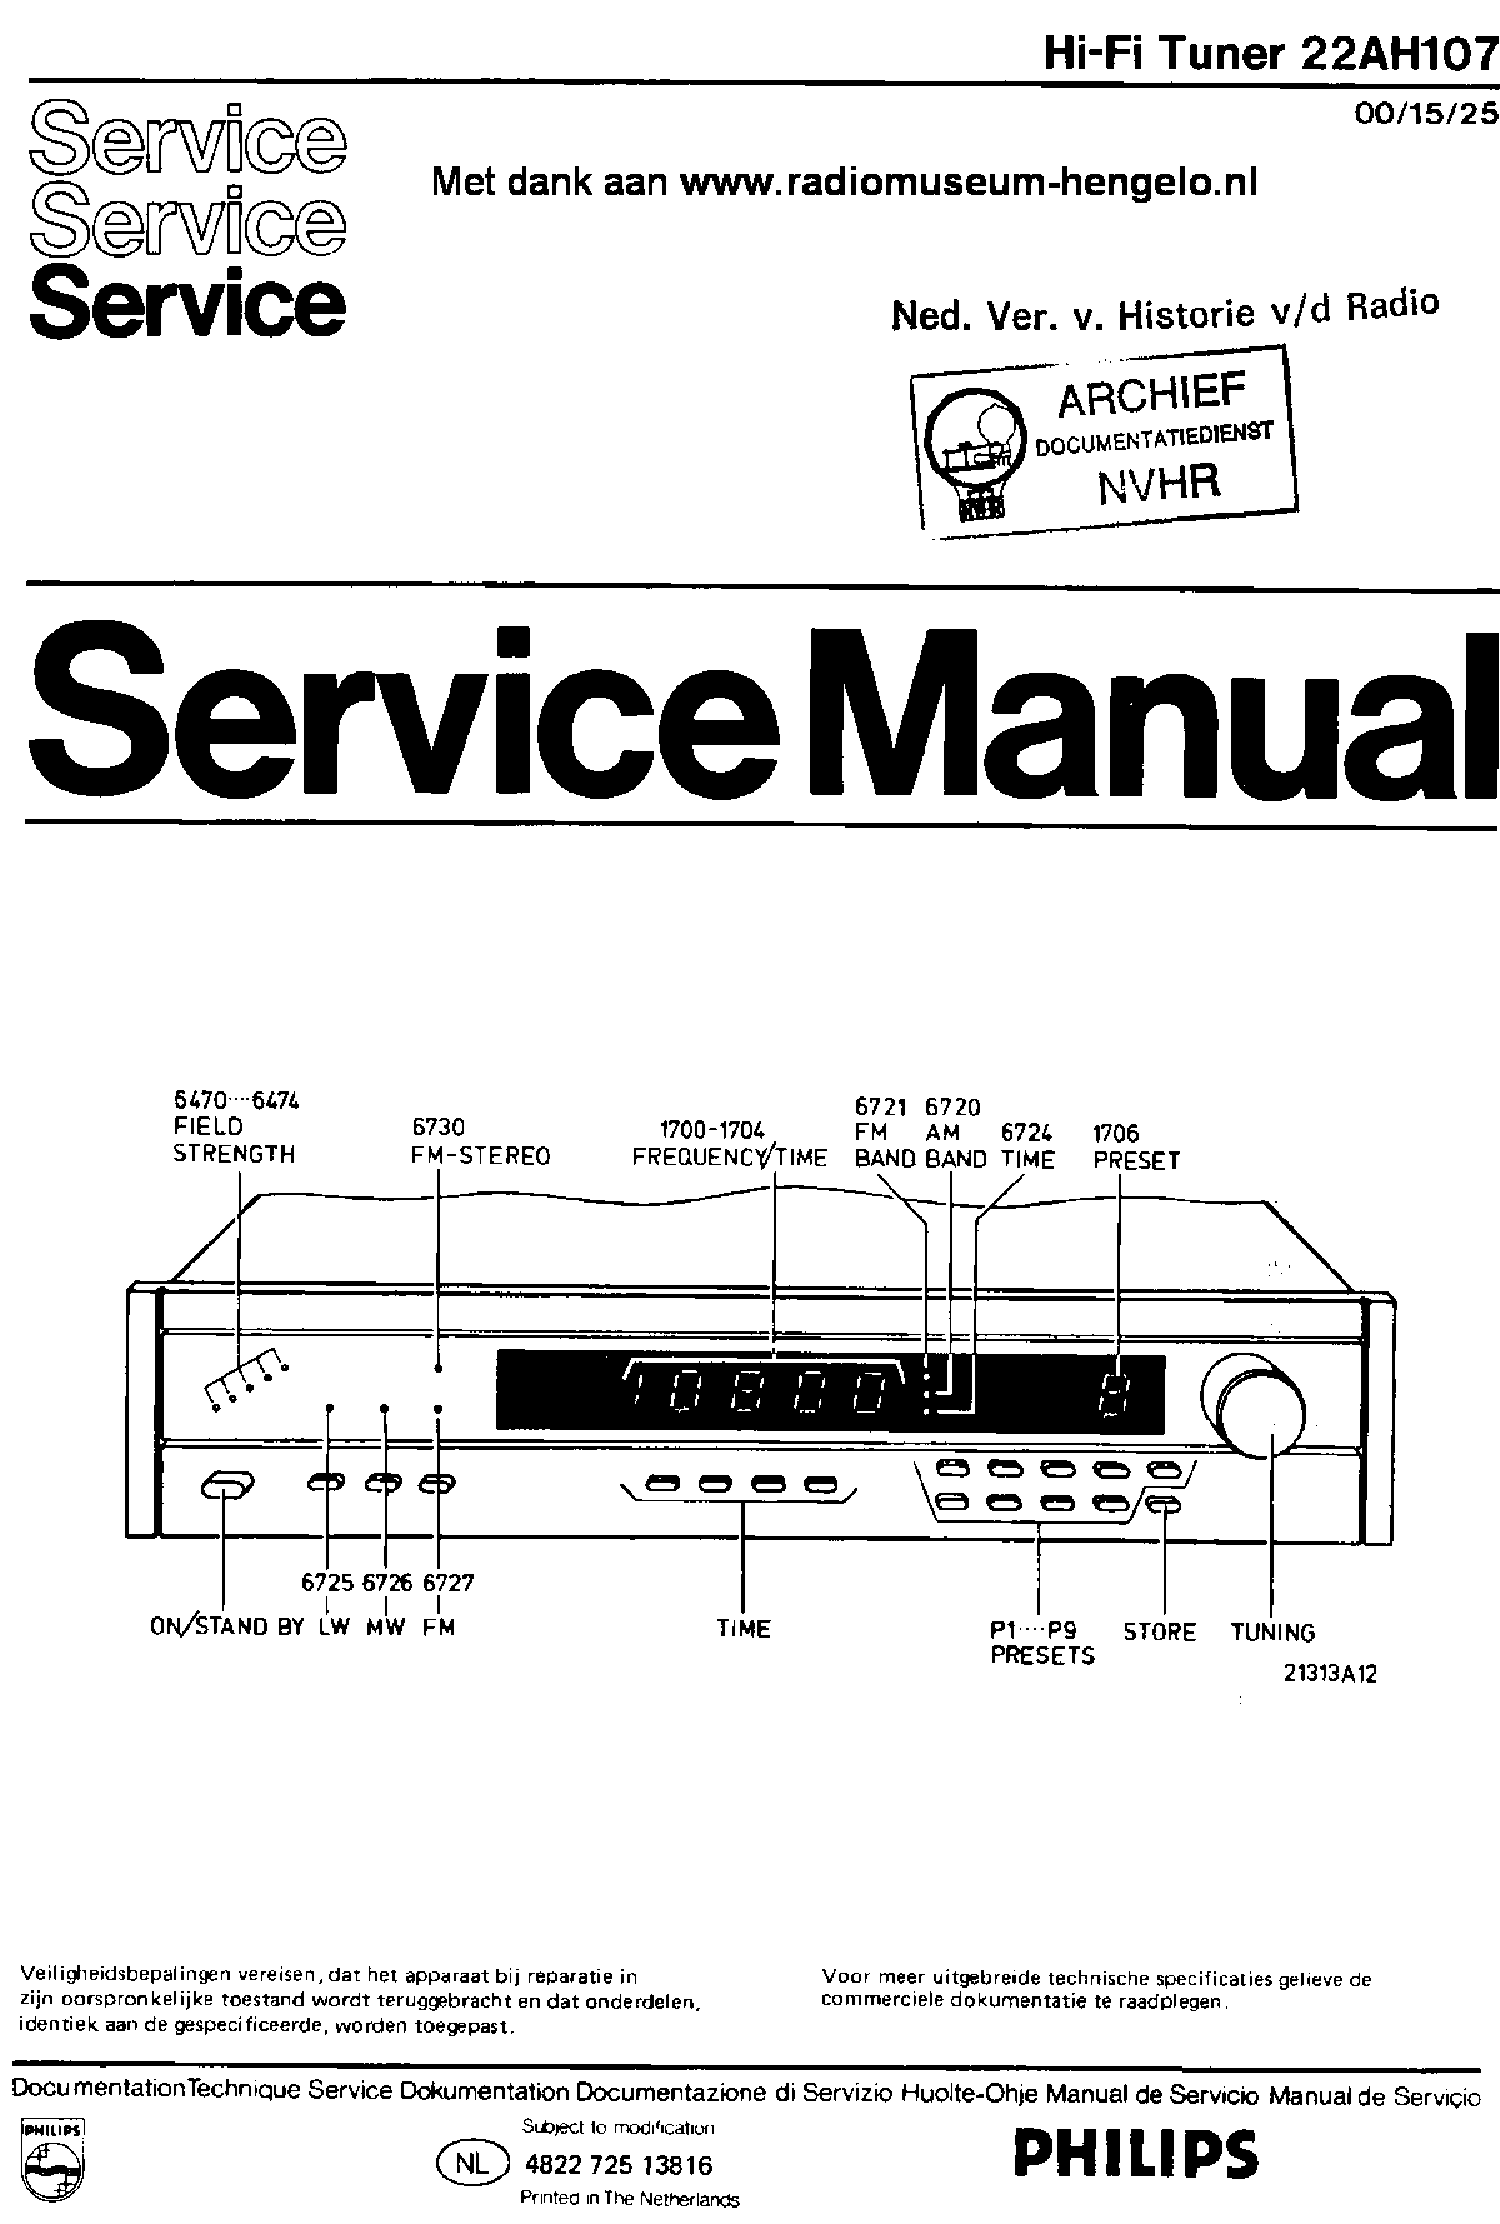 PHILIPS 22AH107-00-15-25 AM-FM HIFI STEREO TUNER SM service manual (1st page)